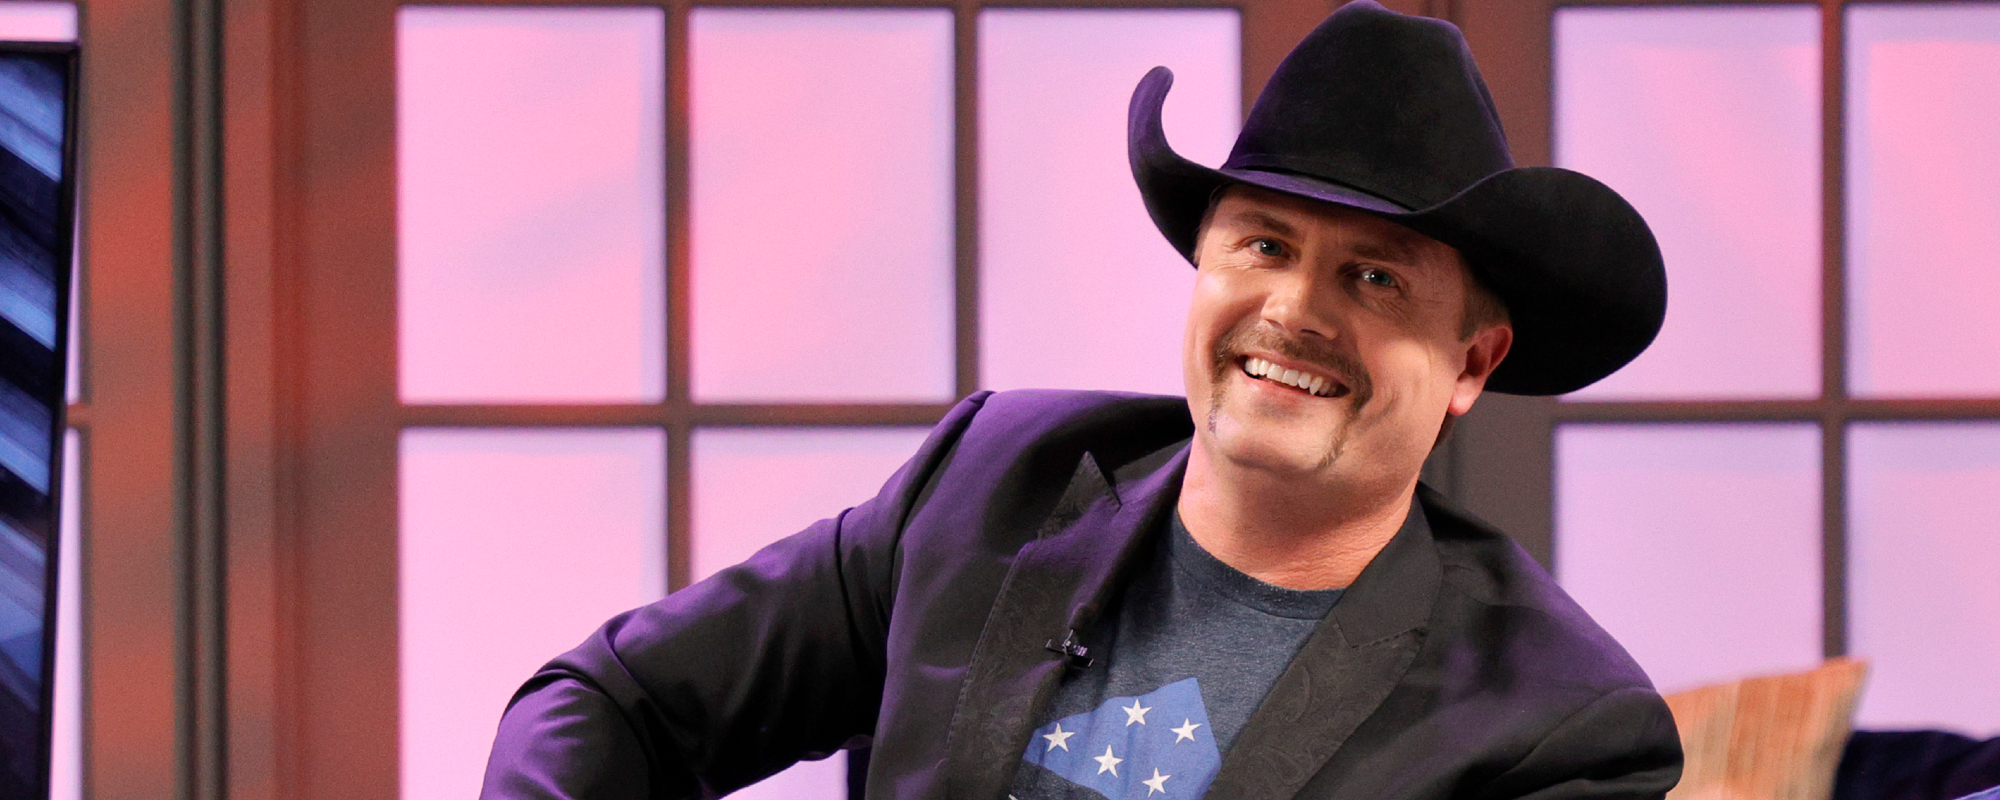 John Rich Speaks Out About Taylor Swift on Toby Keith’s Death